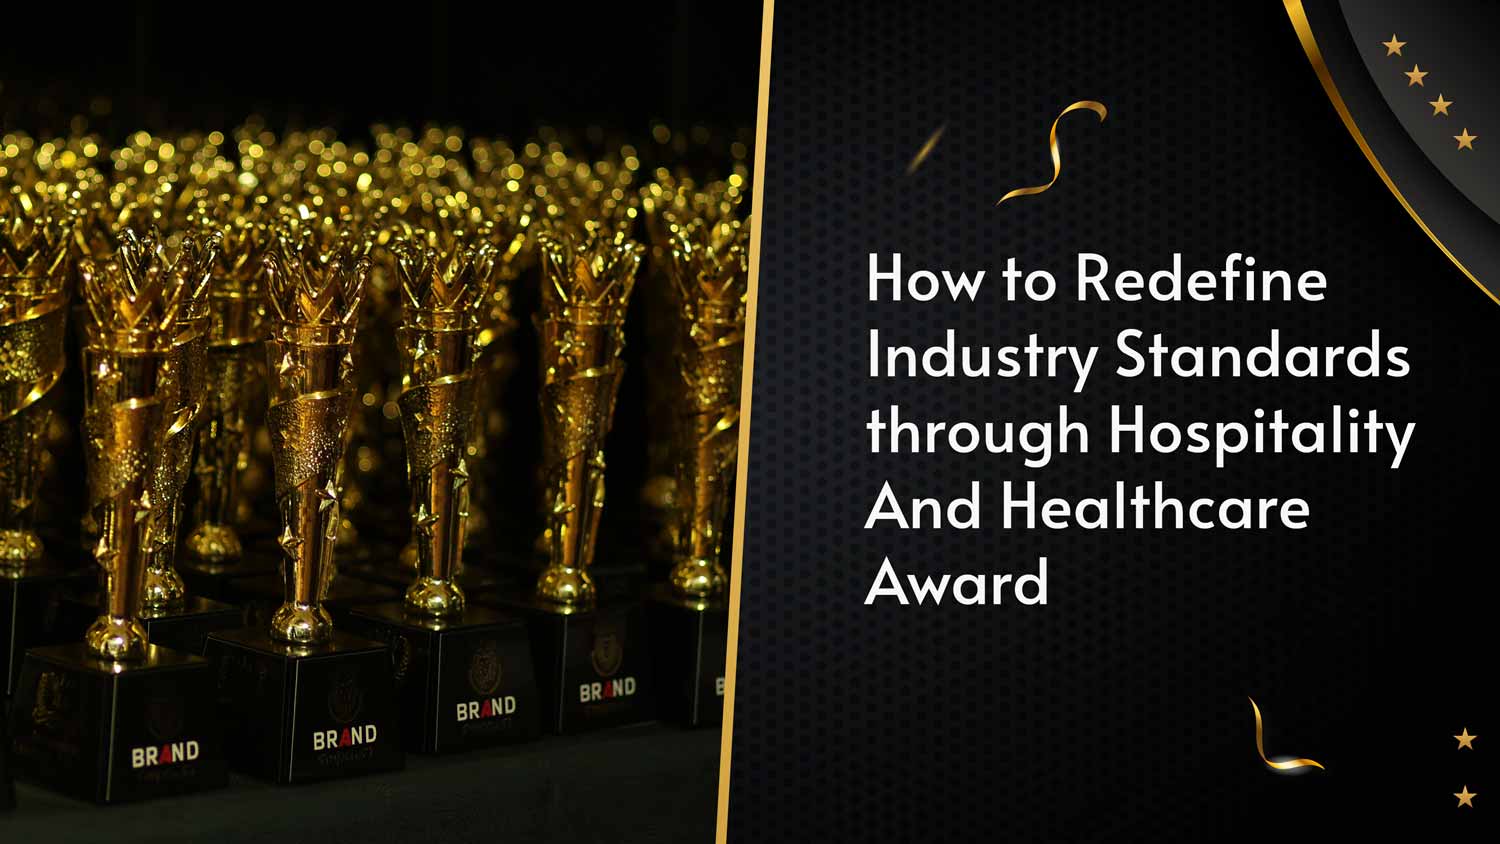 How to Redefine Industry Standards through Hospitality and Healthcare Award 